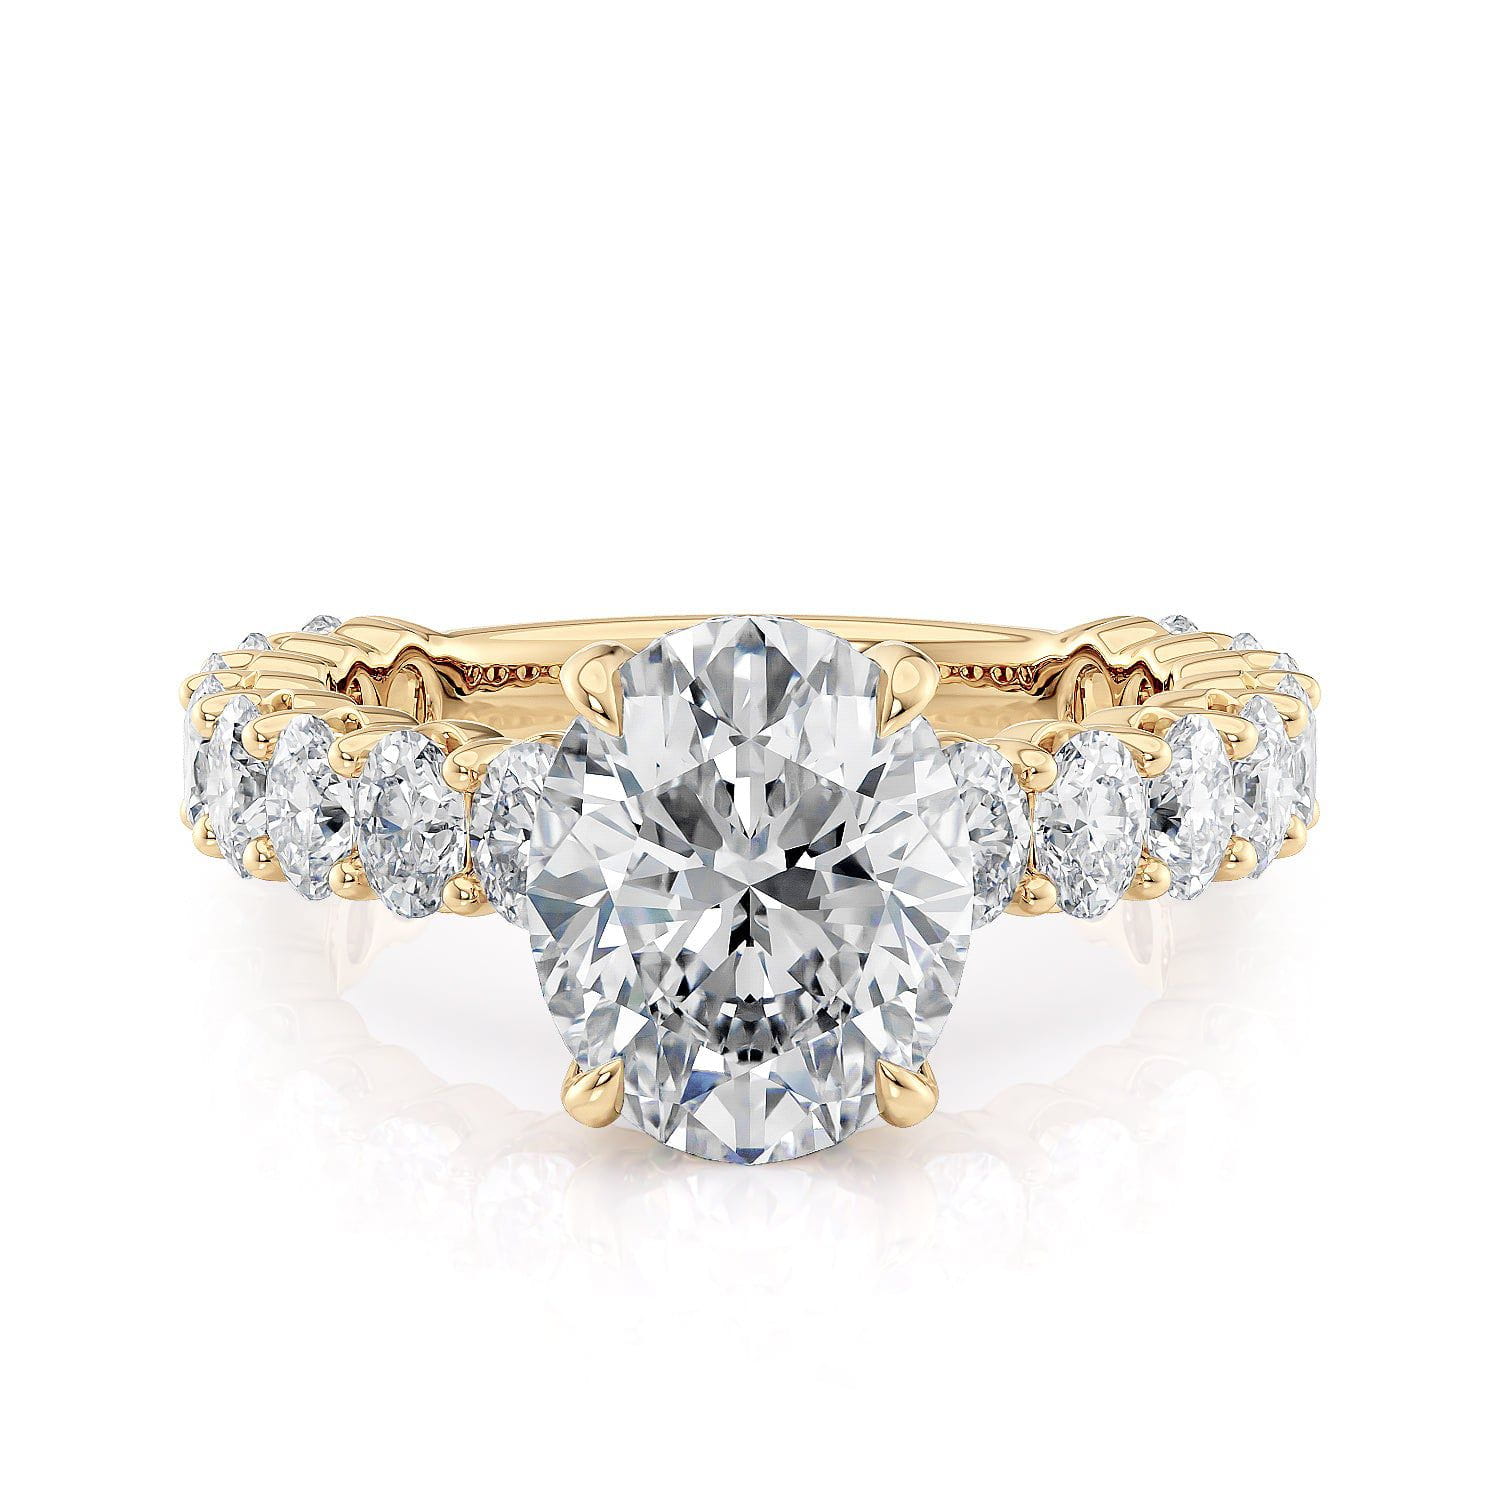 MICHAEL M Engagement Rings Montage R795S-3